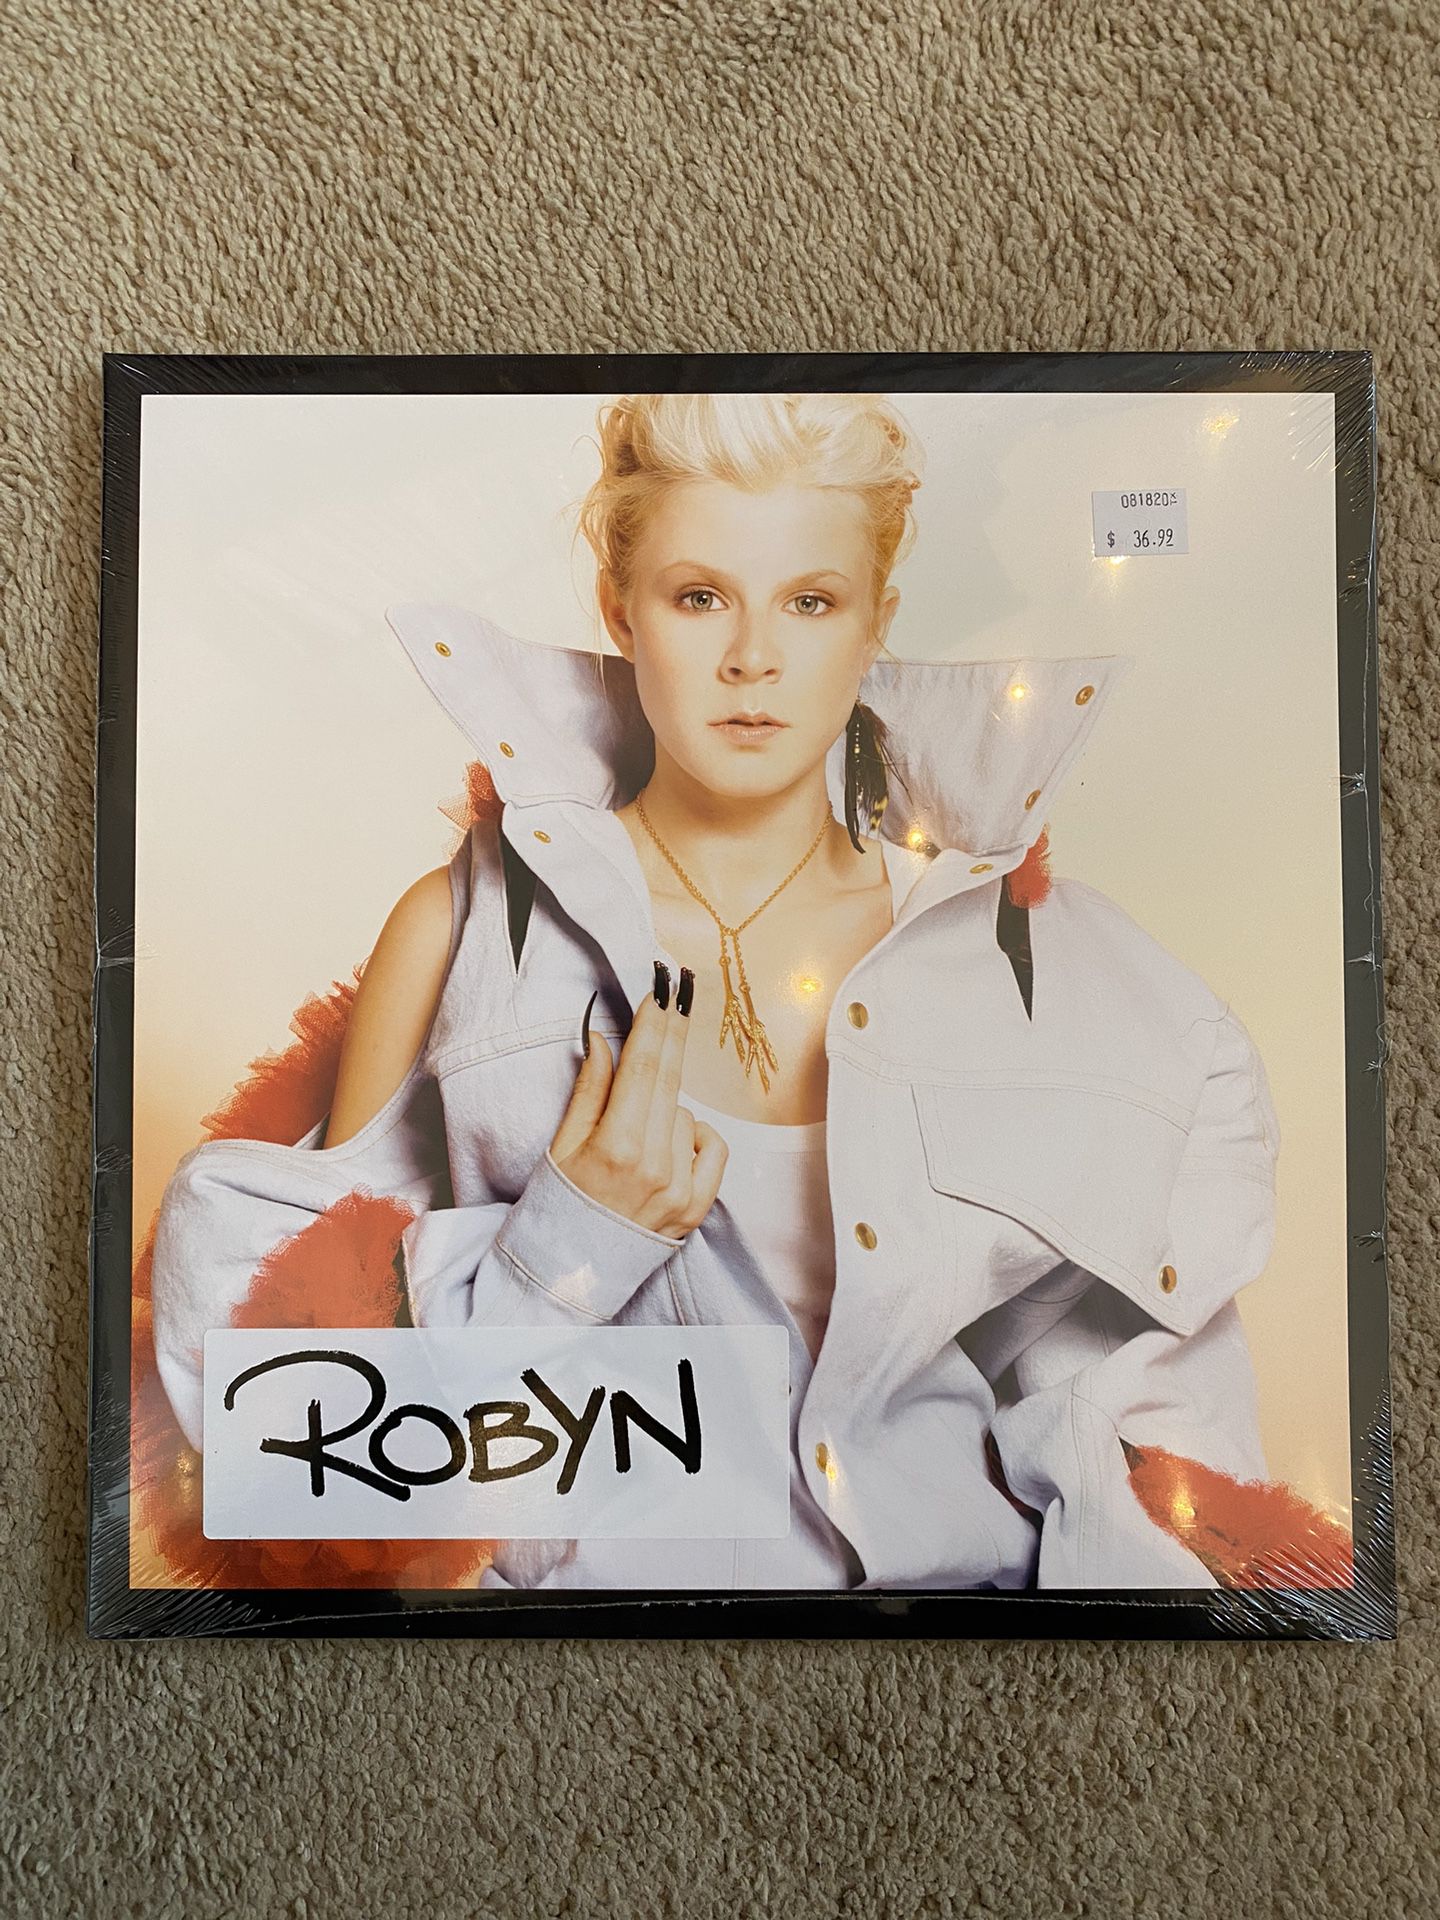 Northern når som helst Forfølgelse Sealed Record Store Day Robyn Limited Edition Red Vinyl Lp for Sale in  Costa Mesa, CA - OfferUp